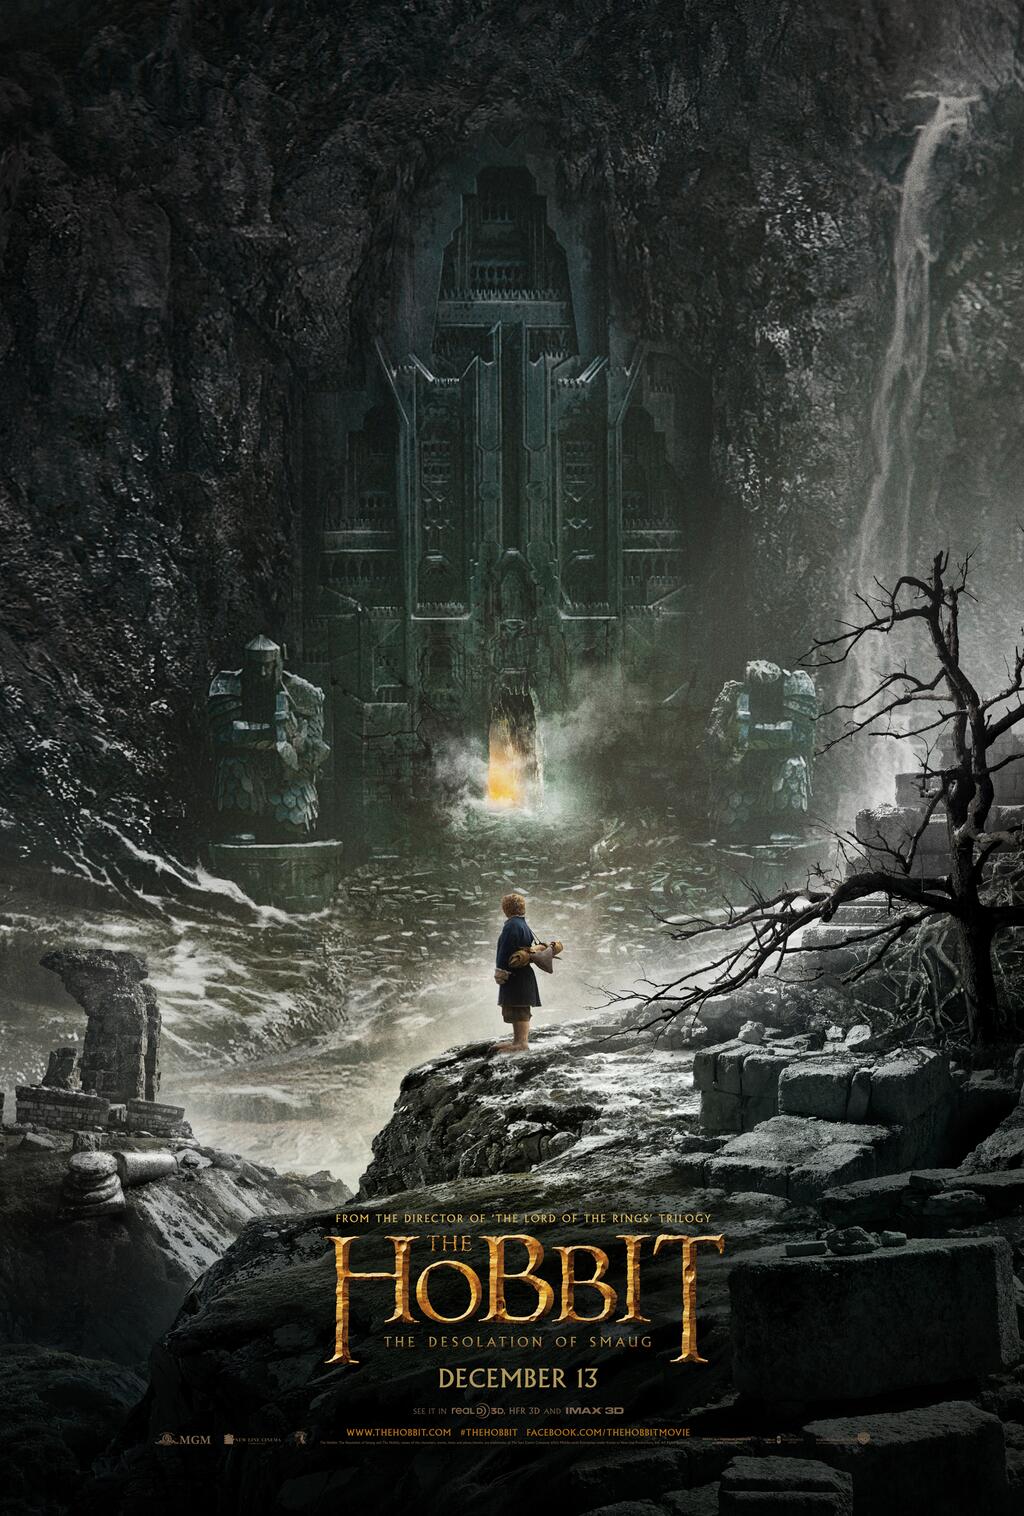 Fantastic New Trailer for The Hobbit: The Desolation of Smaug